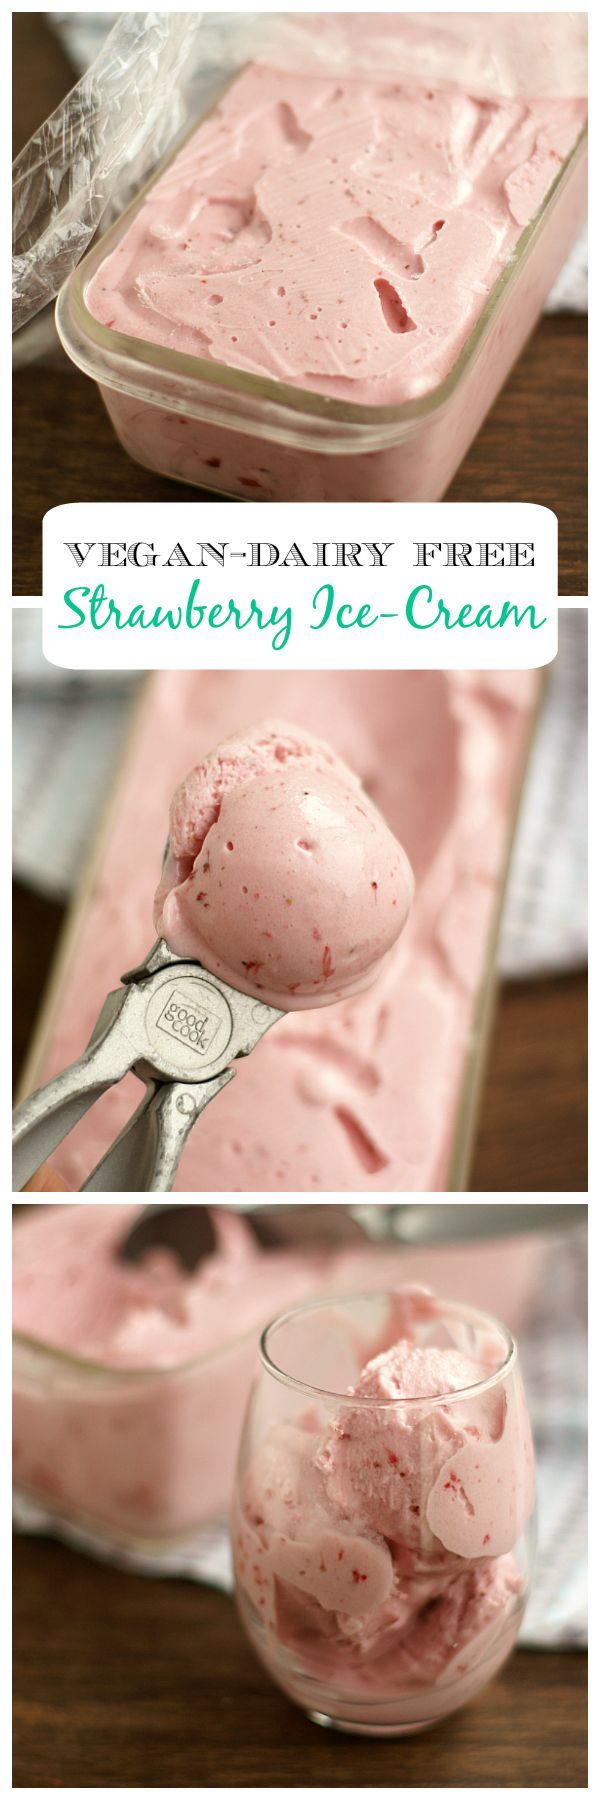 Fresh strawberry ice-cream during strawberry season is the best! This dairy free vegan recipe is not o